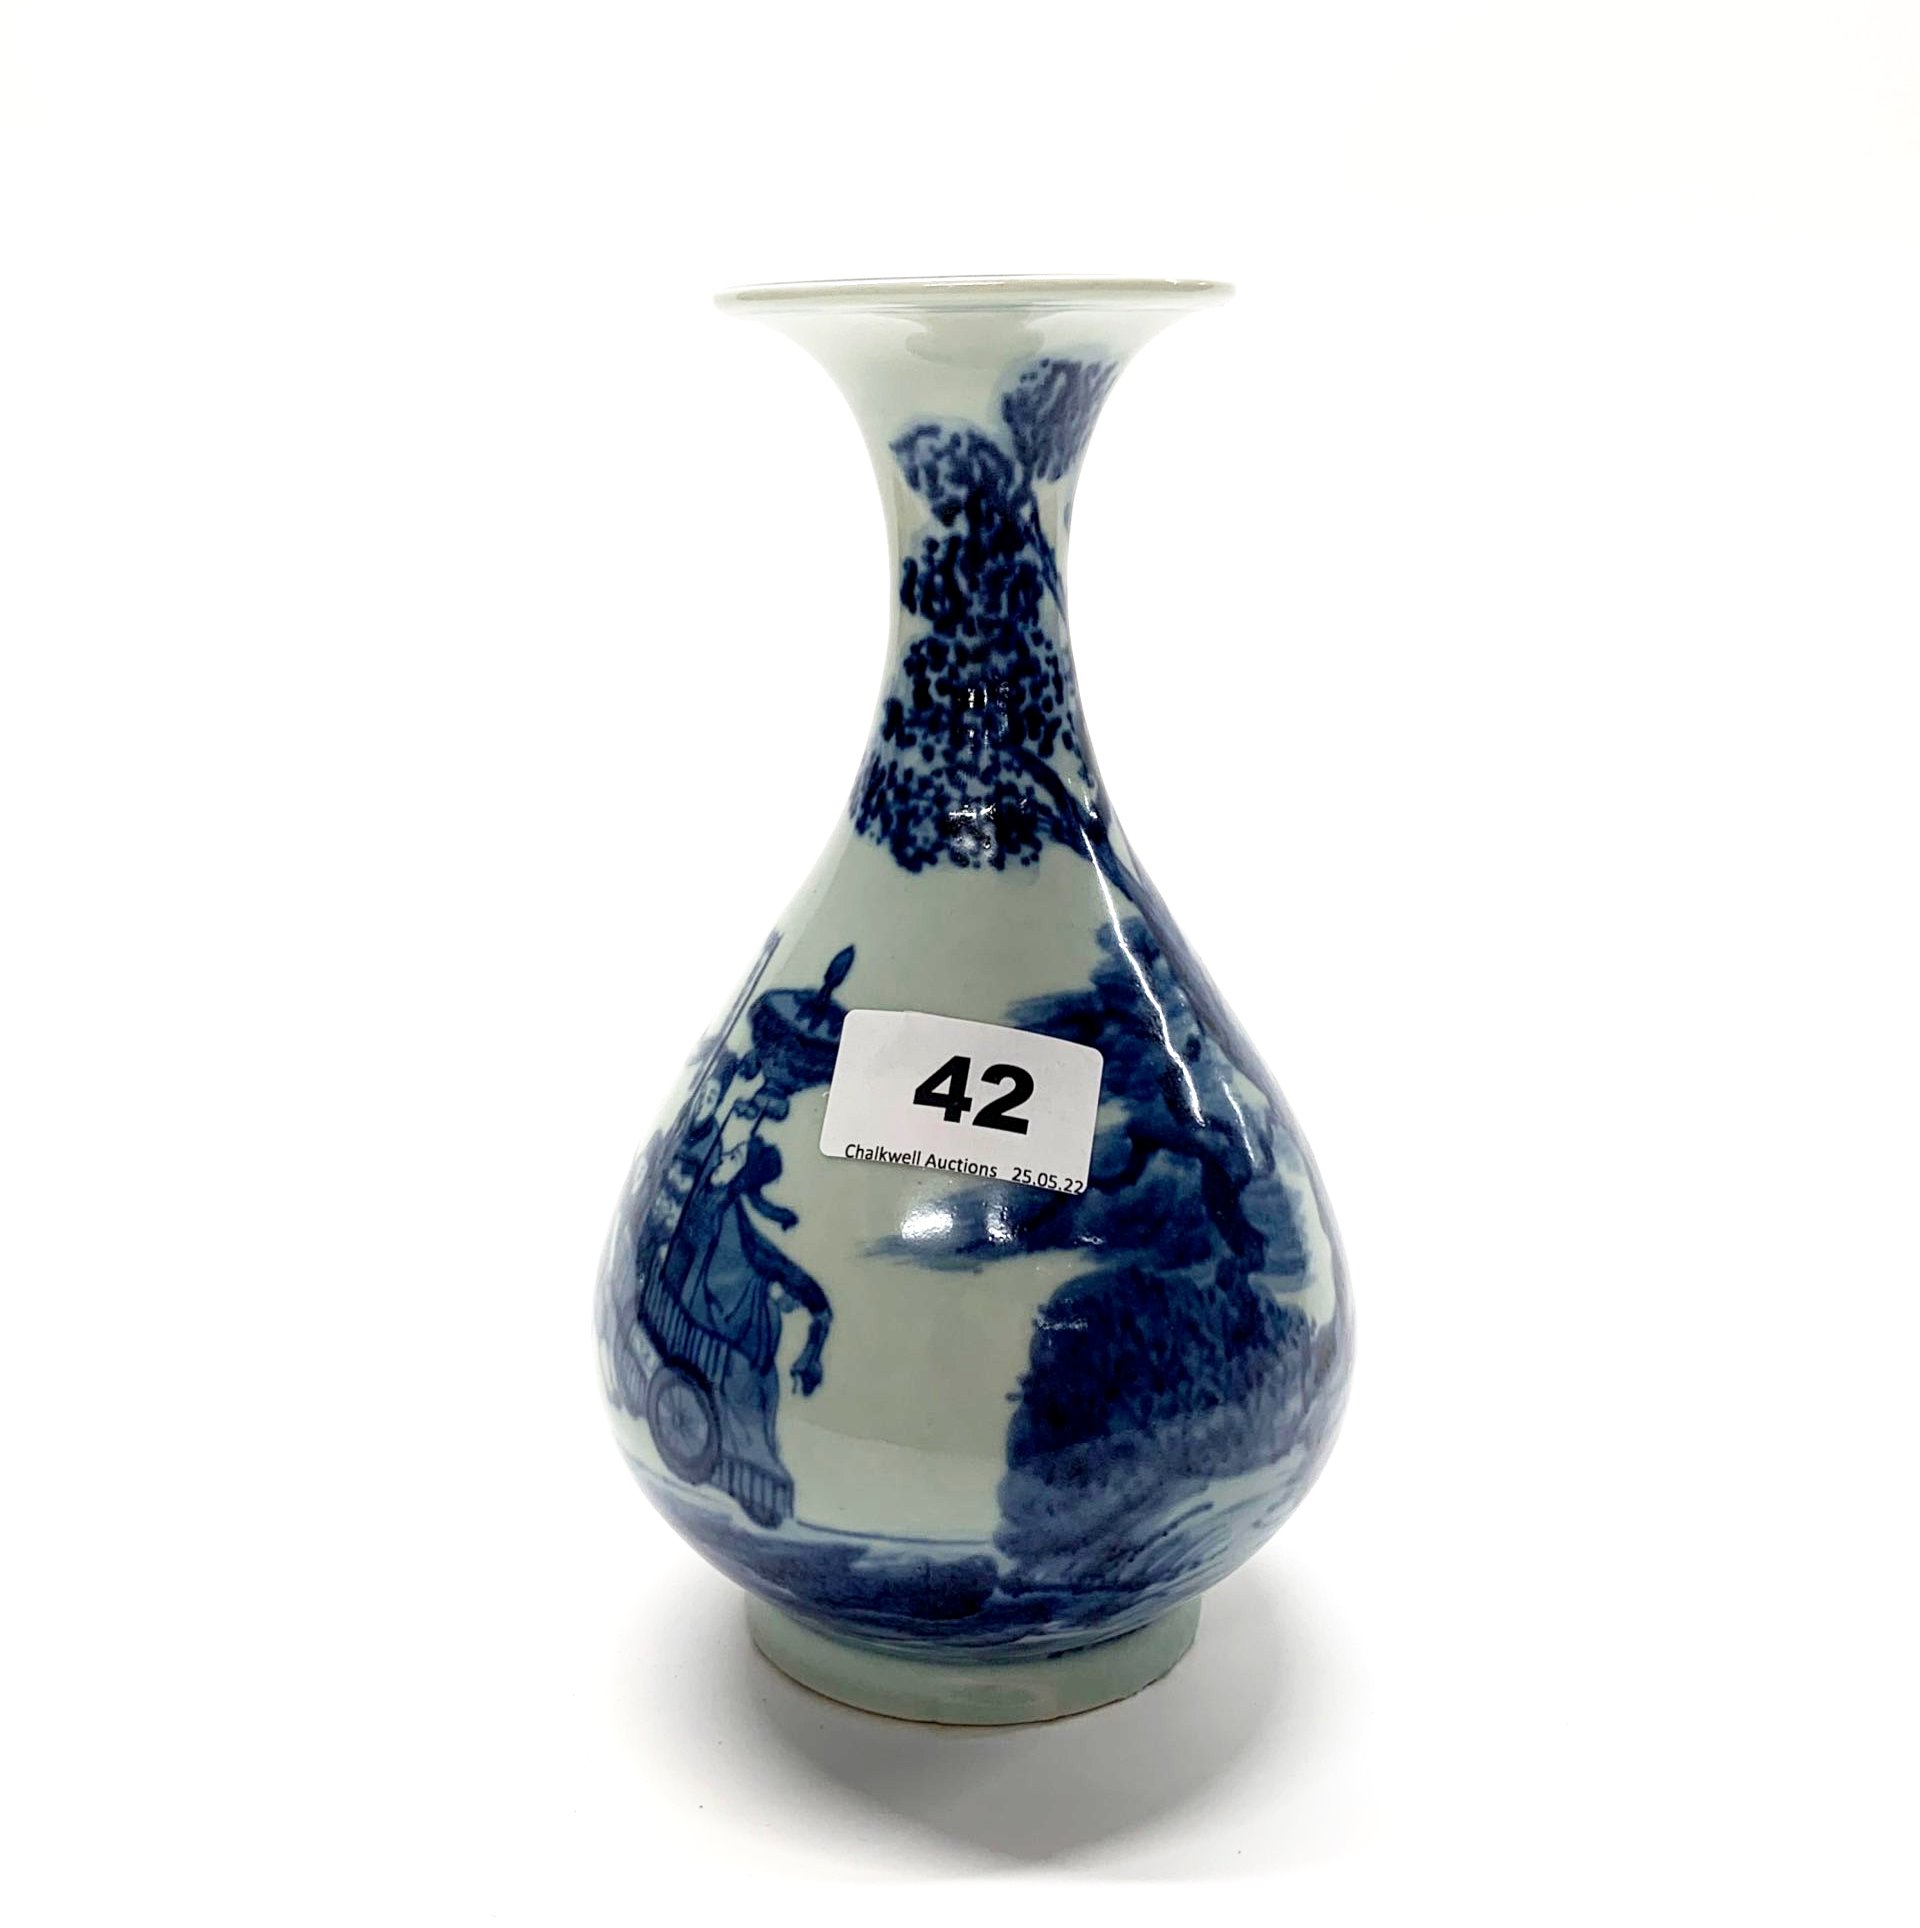 An interesting Chinese hand painted porcelain vase depicting a young woman on a horse meeting a - Image 3 of 3